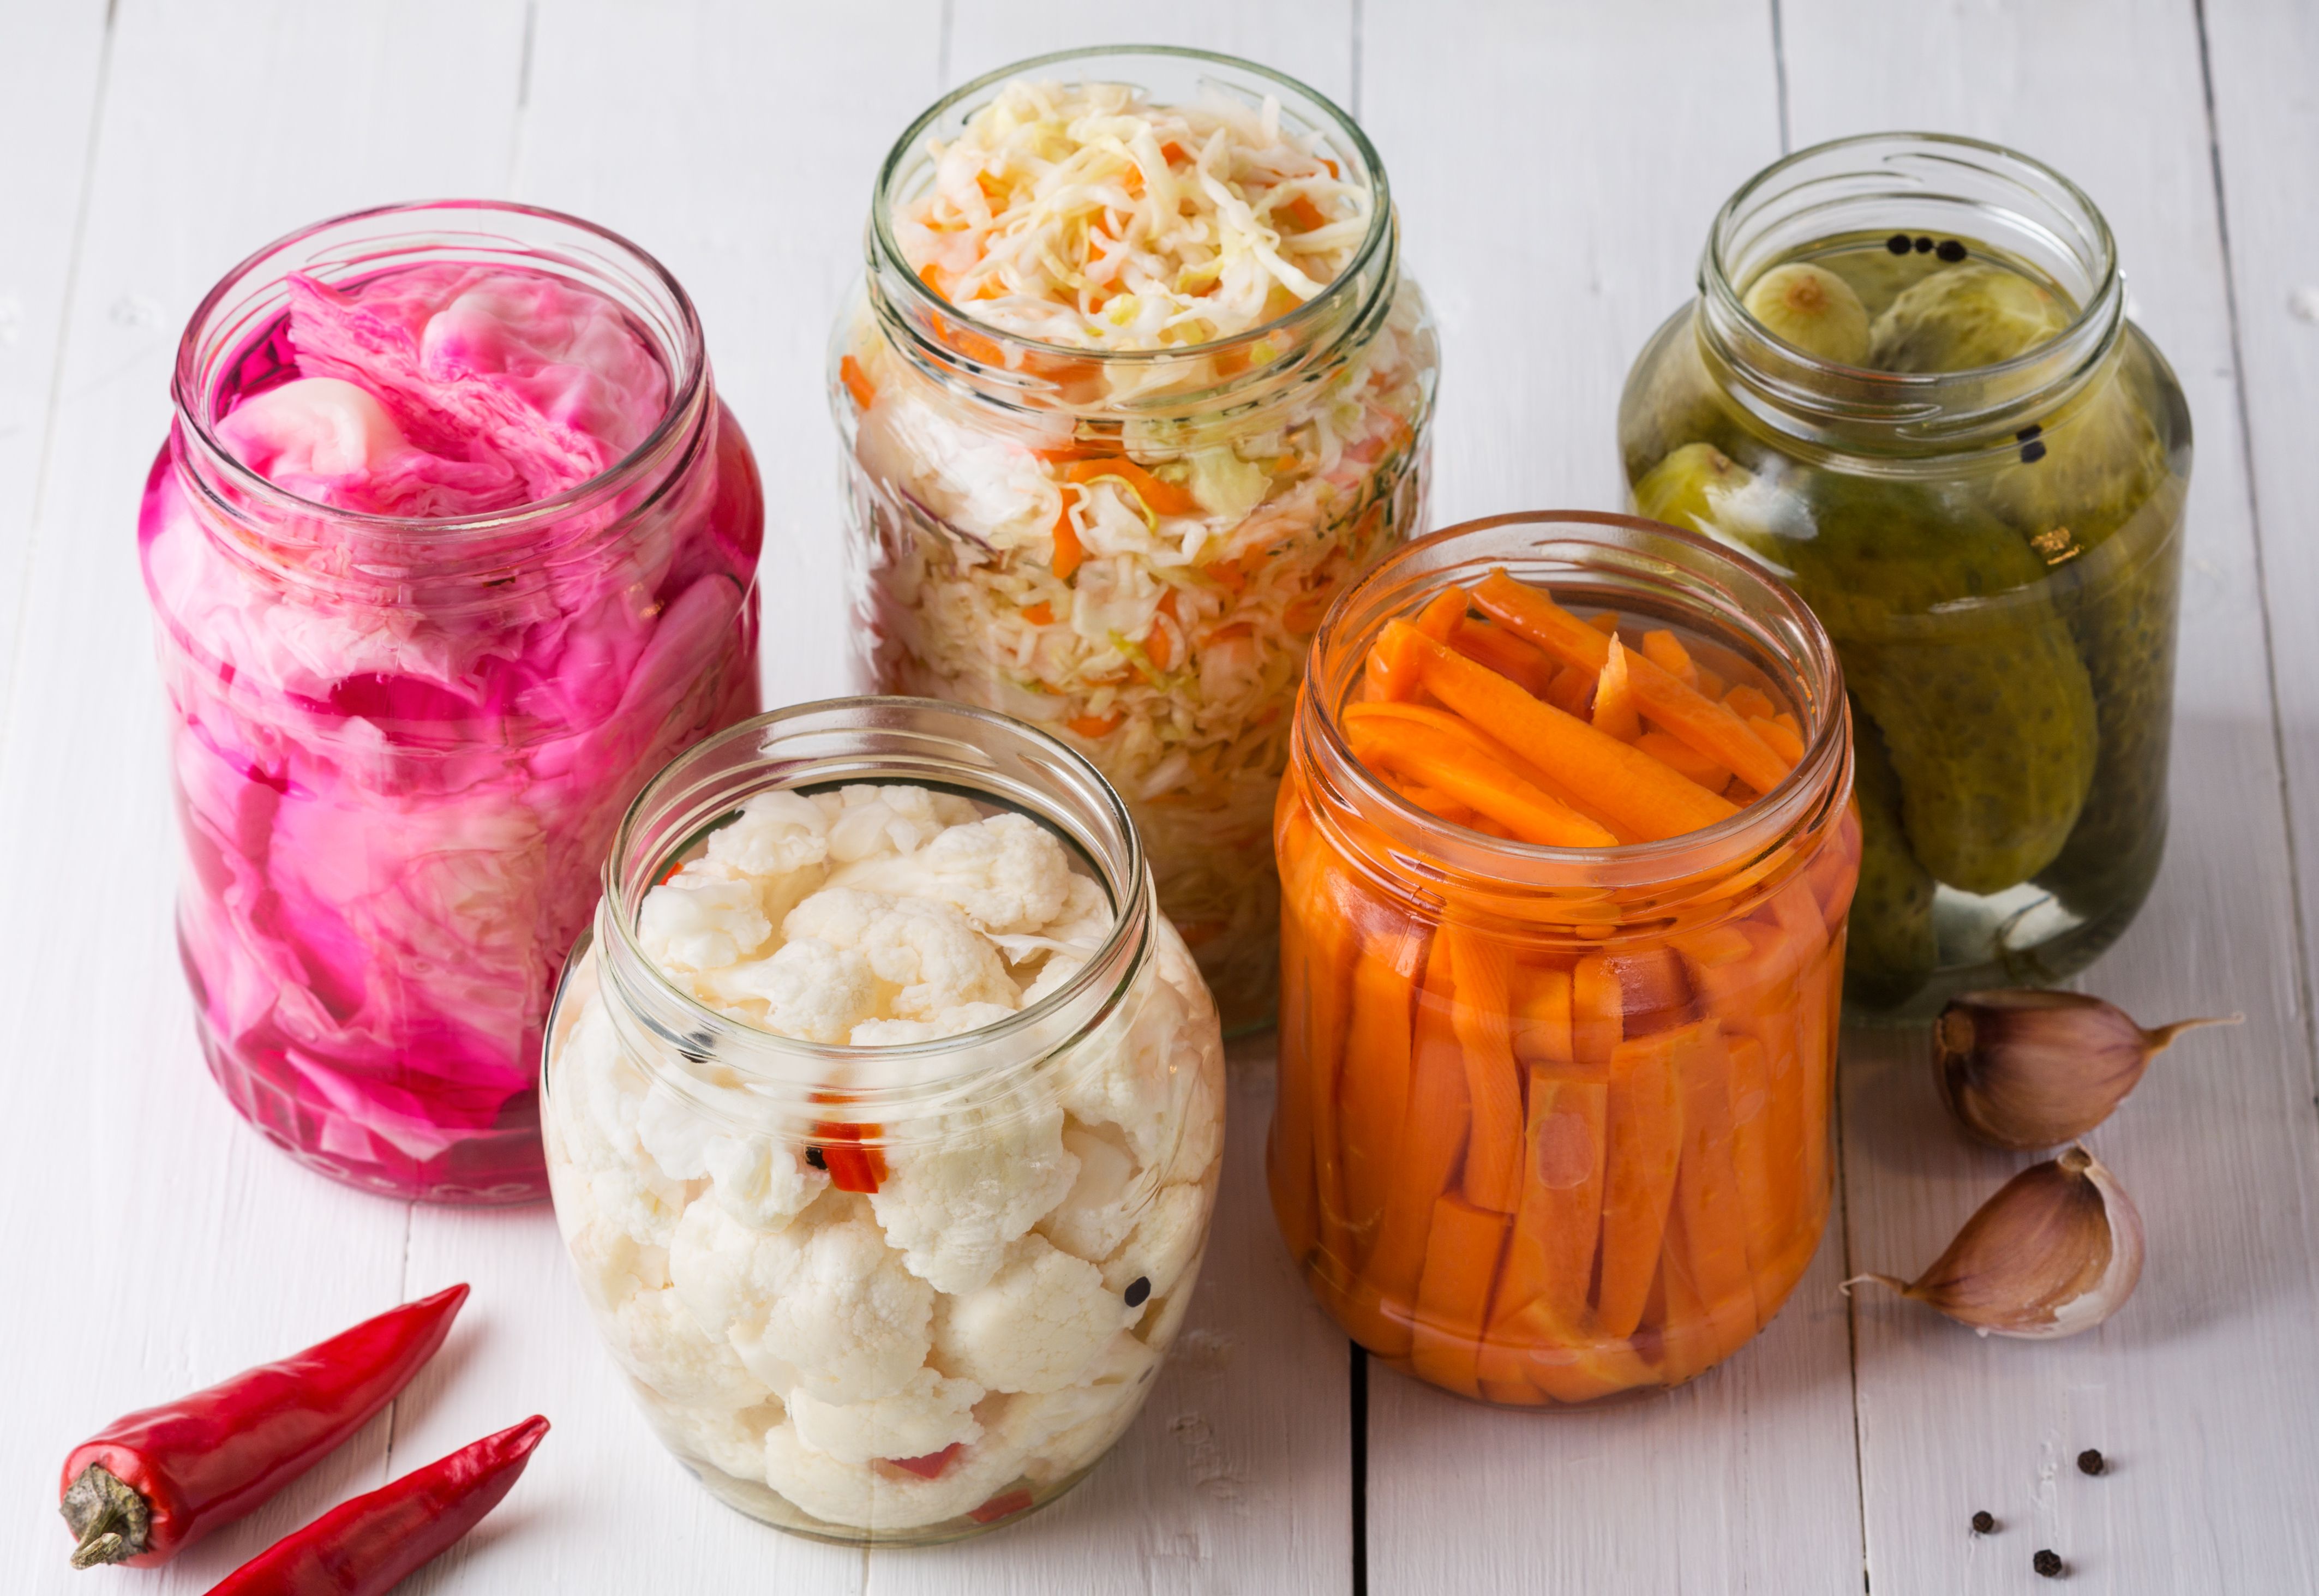 fermented vegetables sauerkraut with carrots and royalty free image 1638295608